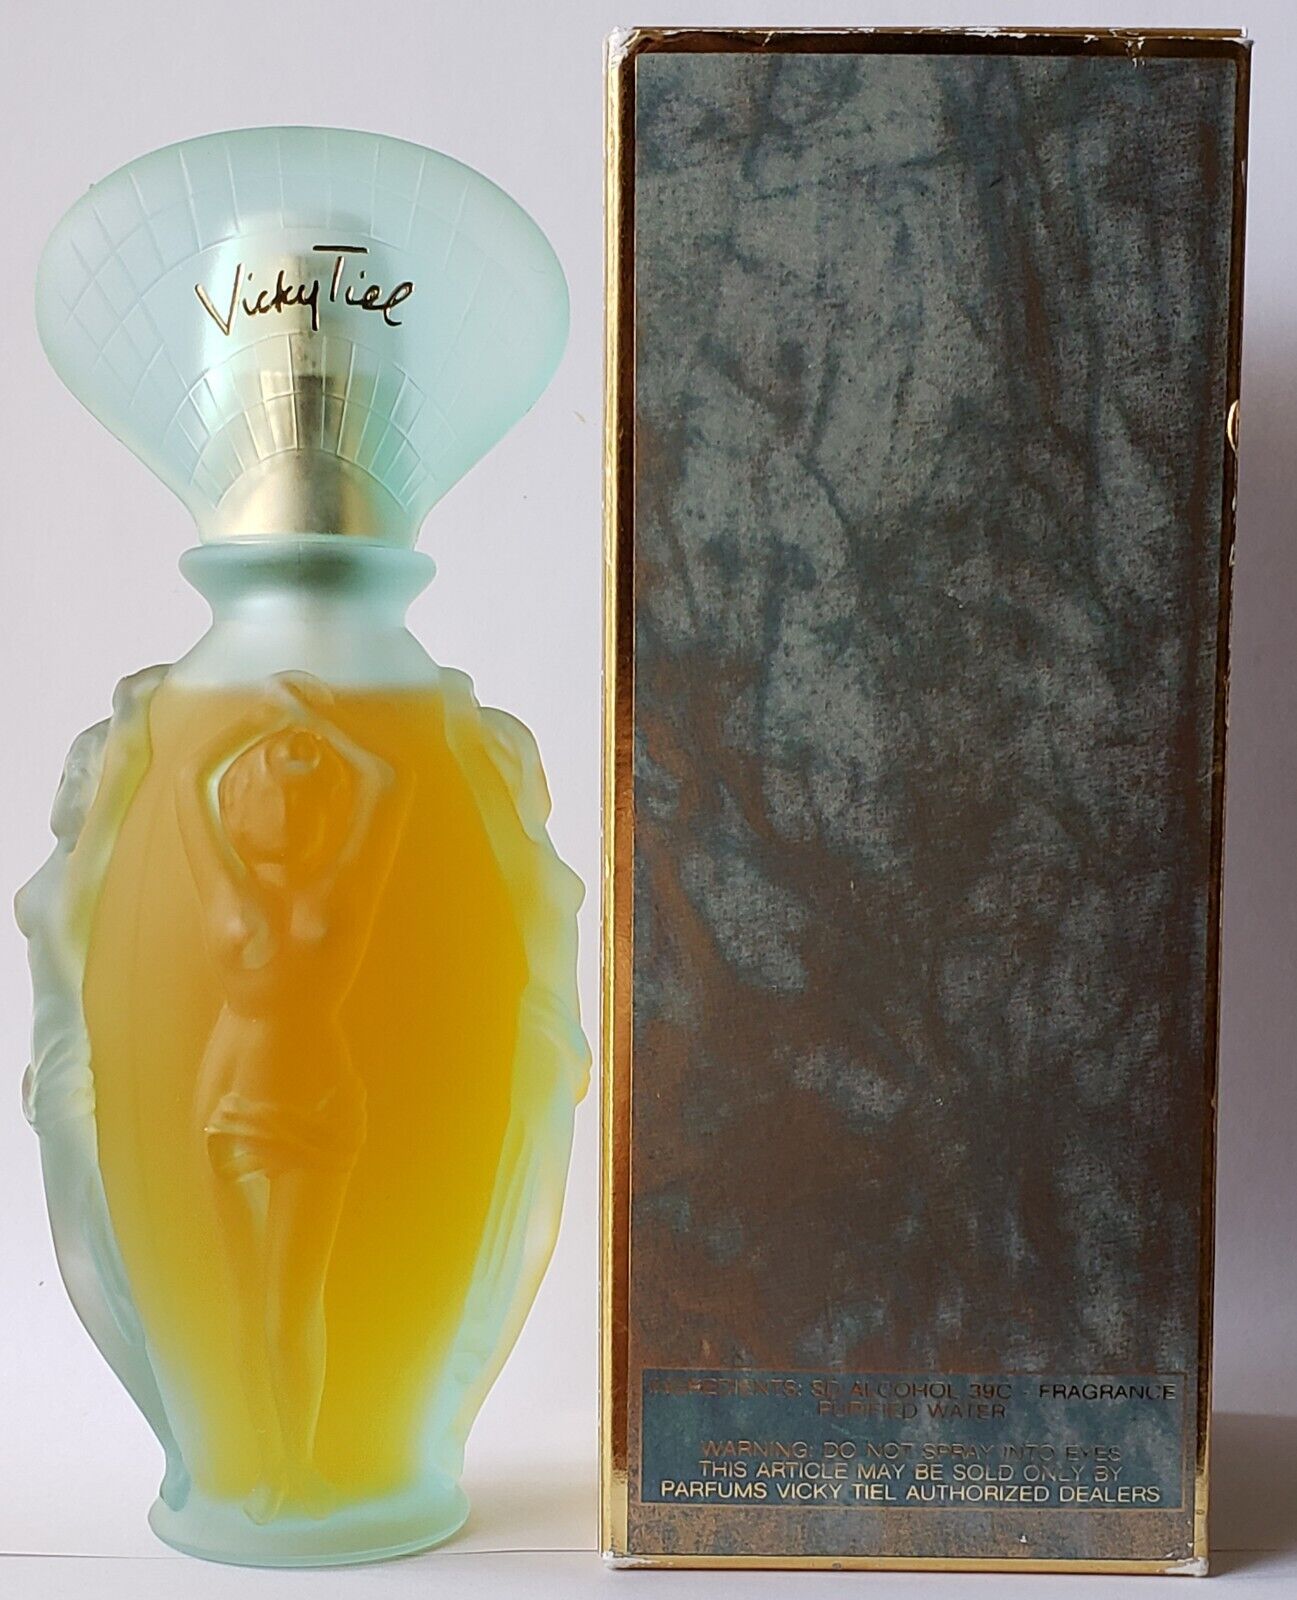 VICKY TIEL for Women 3.4oz/100 ml EDT Vintage Discontinued Art Deco Perfume